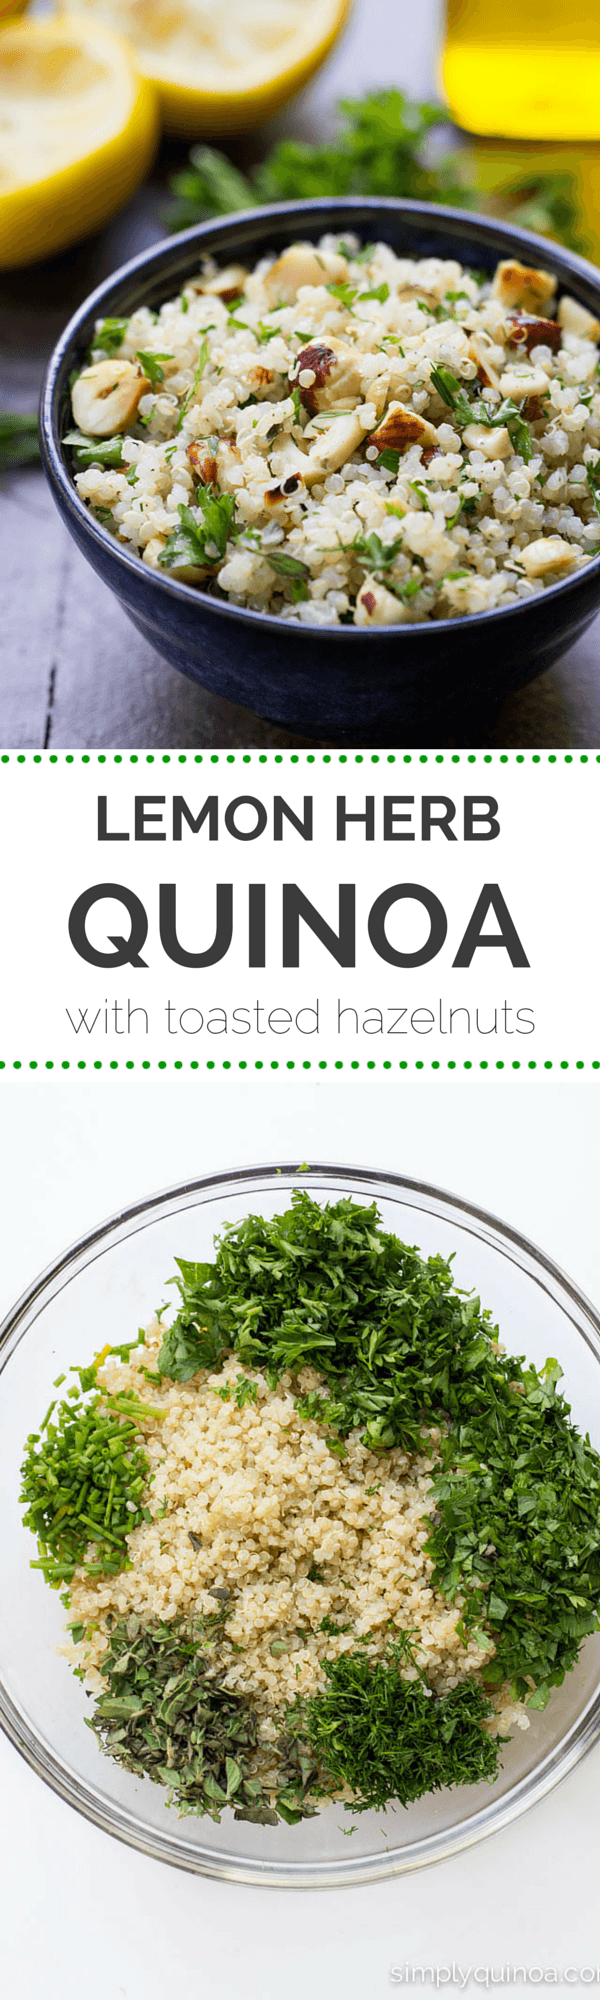 Lemon Herb Quinoa Salad with Toasted Hazelnuts - fresh, light and packed full of flavor | simplyquinoa.com